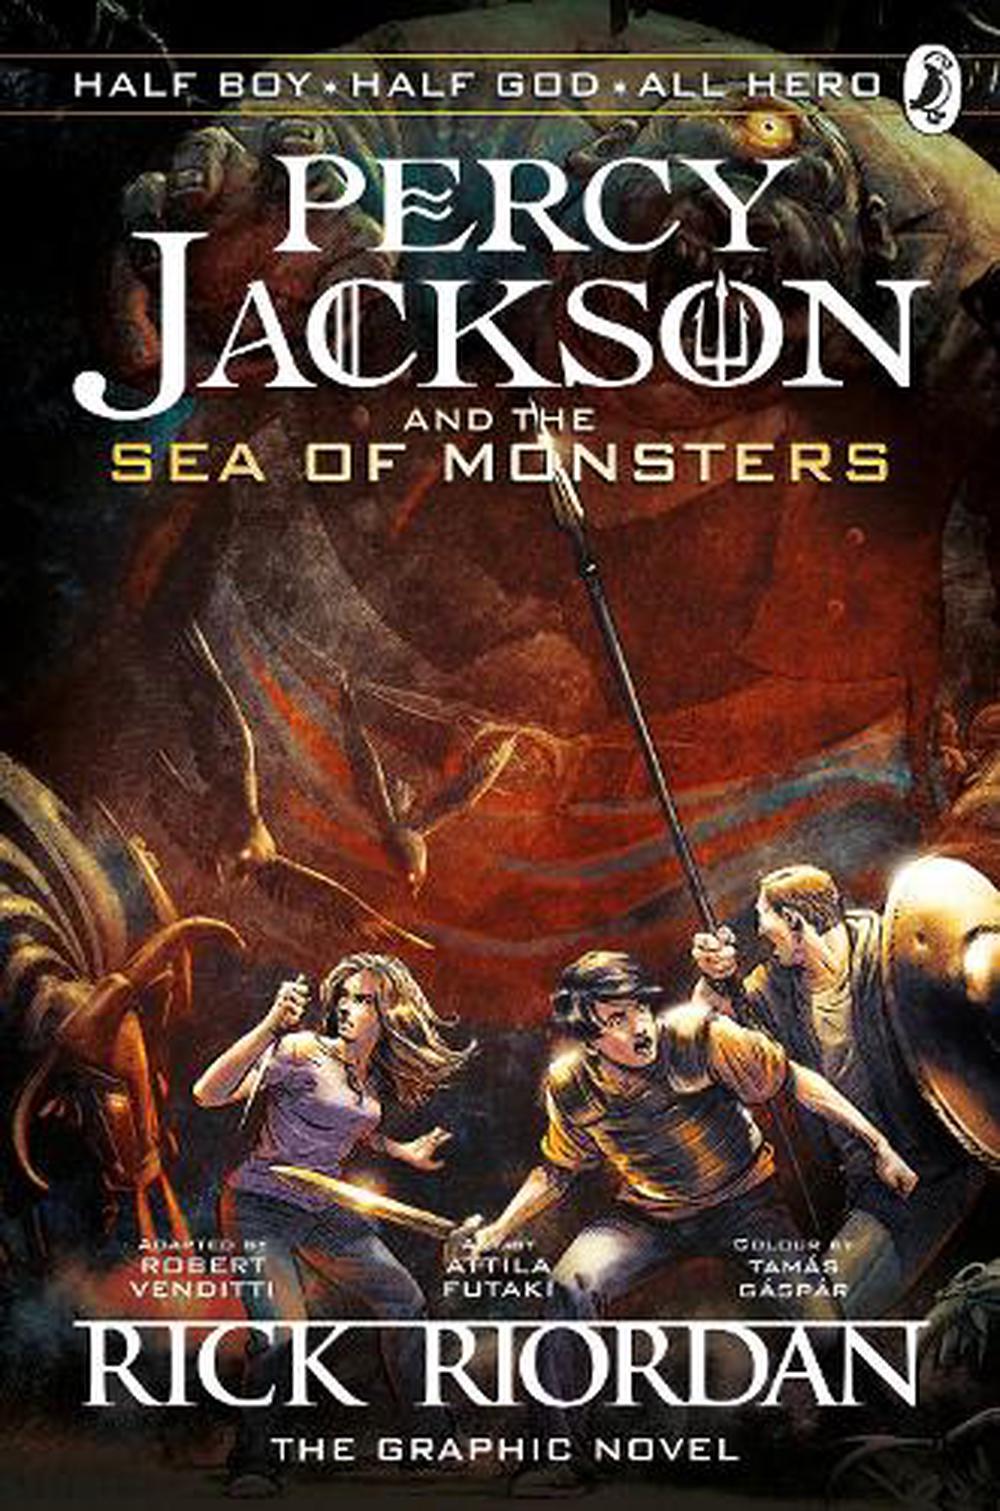 online　Jackson　of　by　Rick　2)　Buy　Monsters:　Riordan,　Graphic　The　9780141338255　Novel　and　Paperback,　the　The　Nile　Percy　(Book　Sea　at